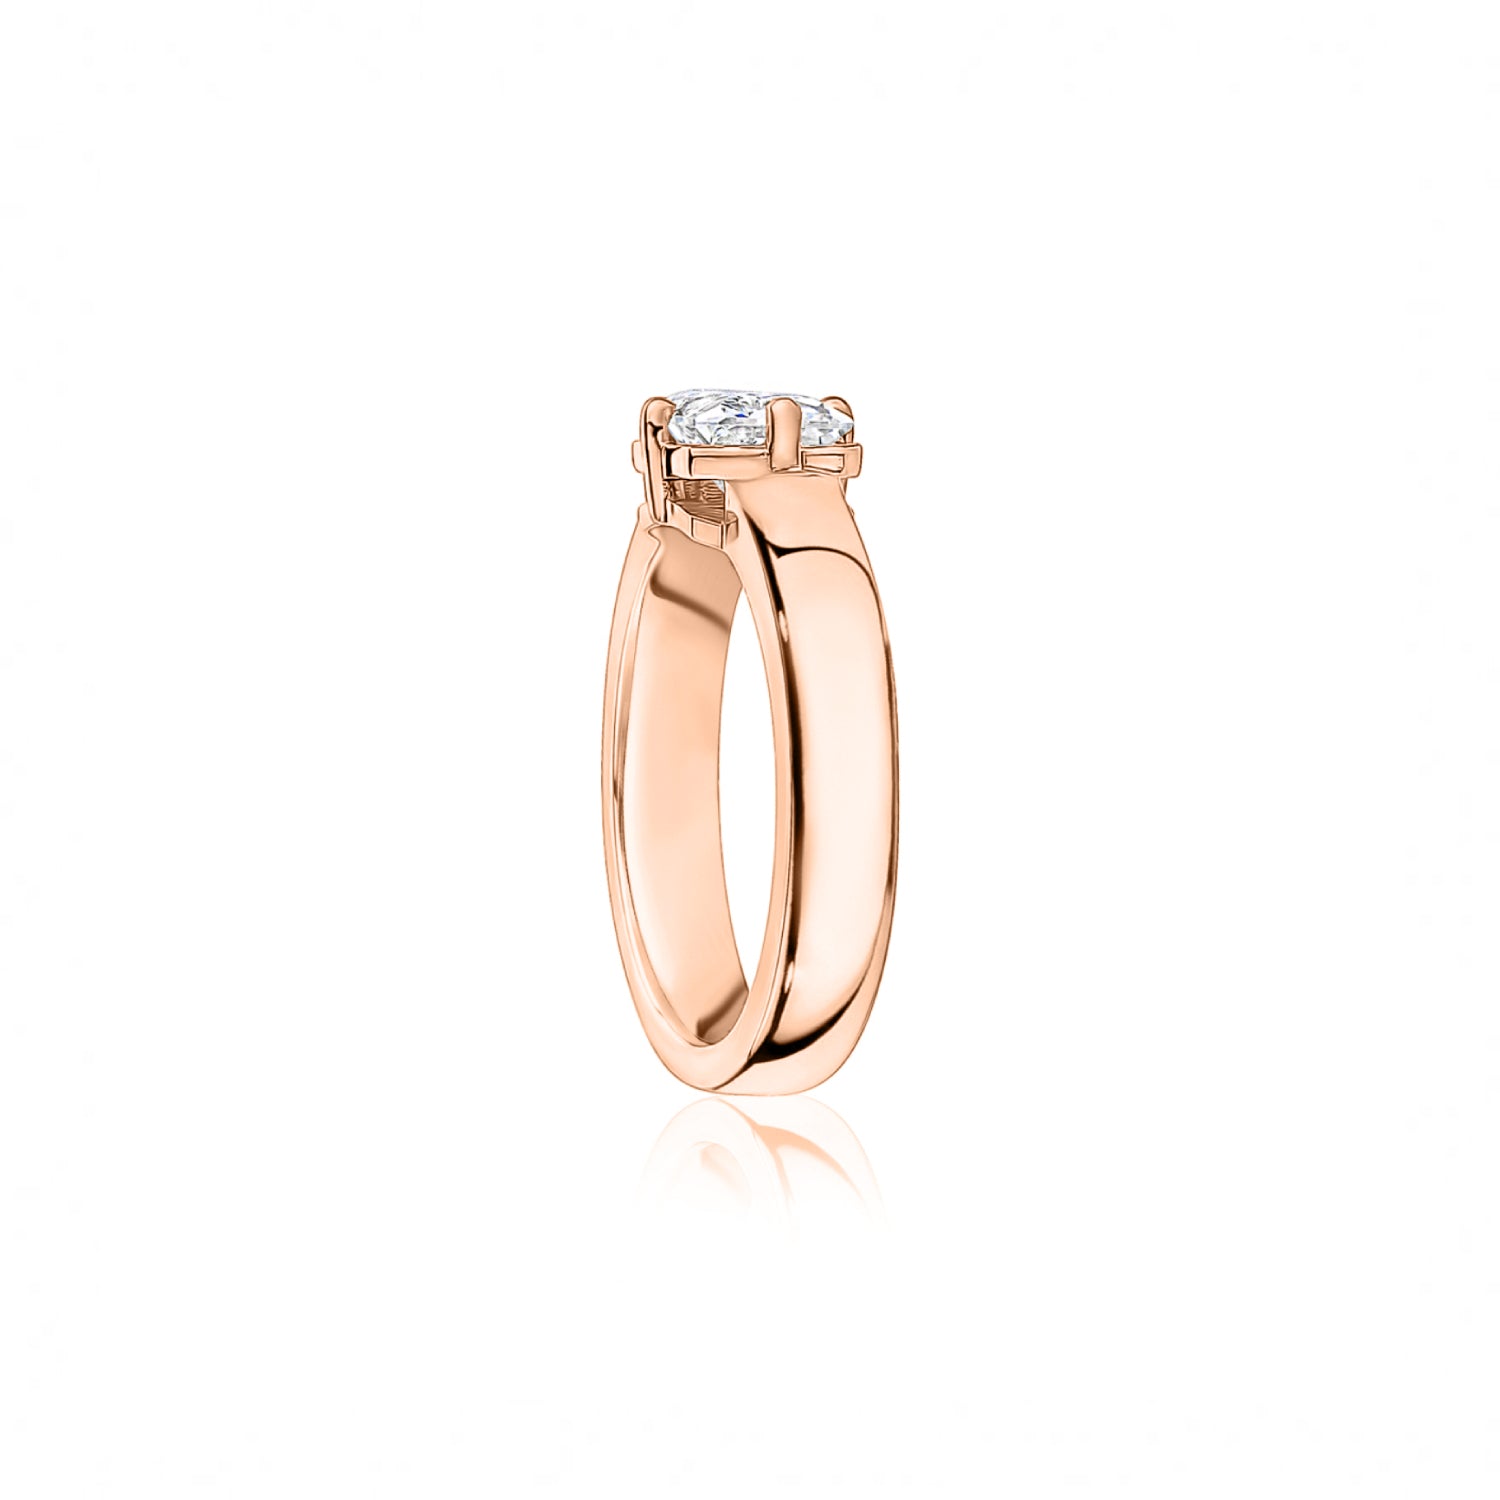 Radiant Cut Diamond Wide Band Solitaire Engagement Ring in Rose Gold Side View